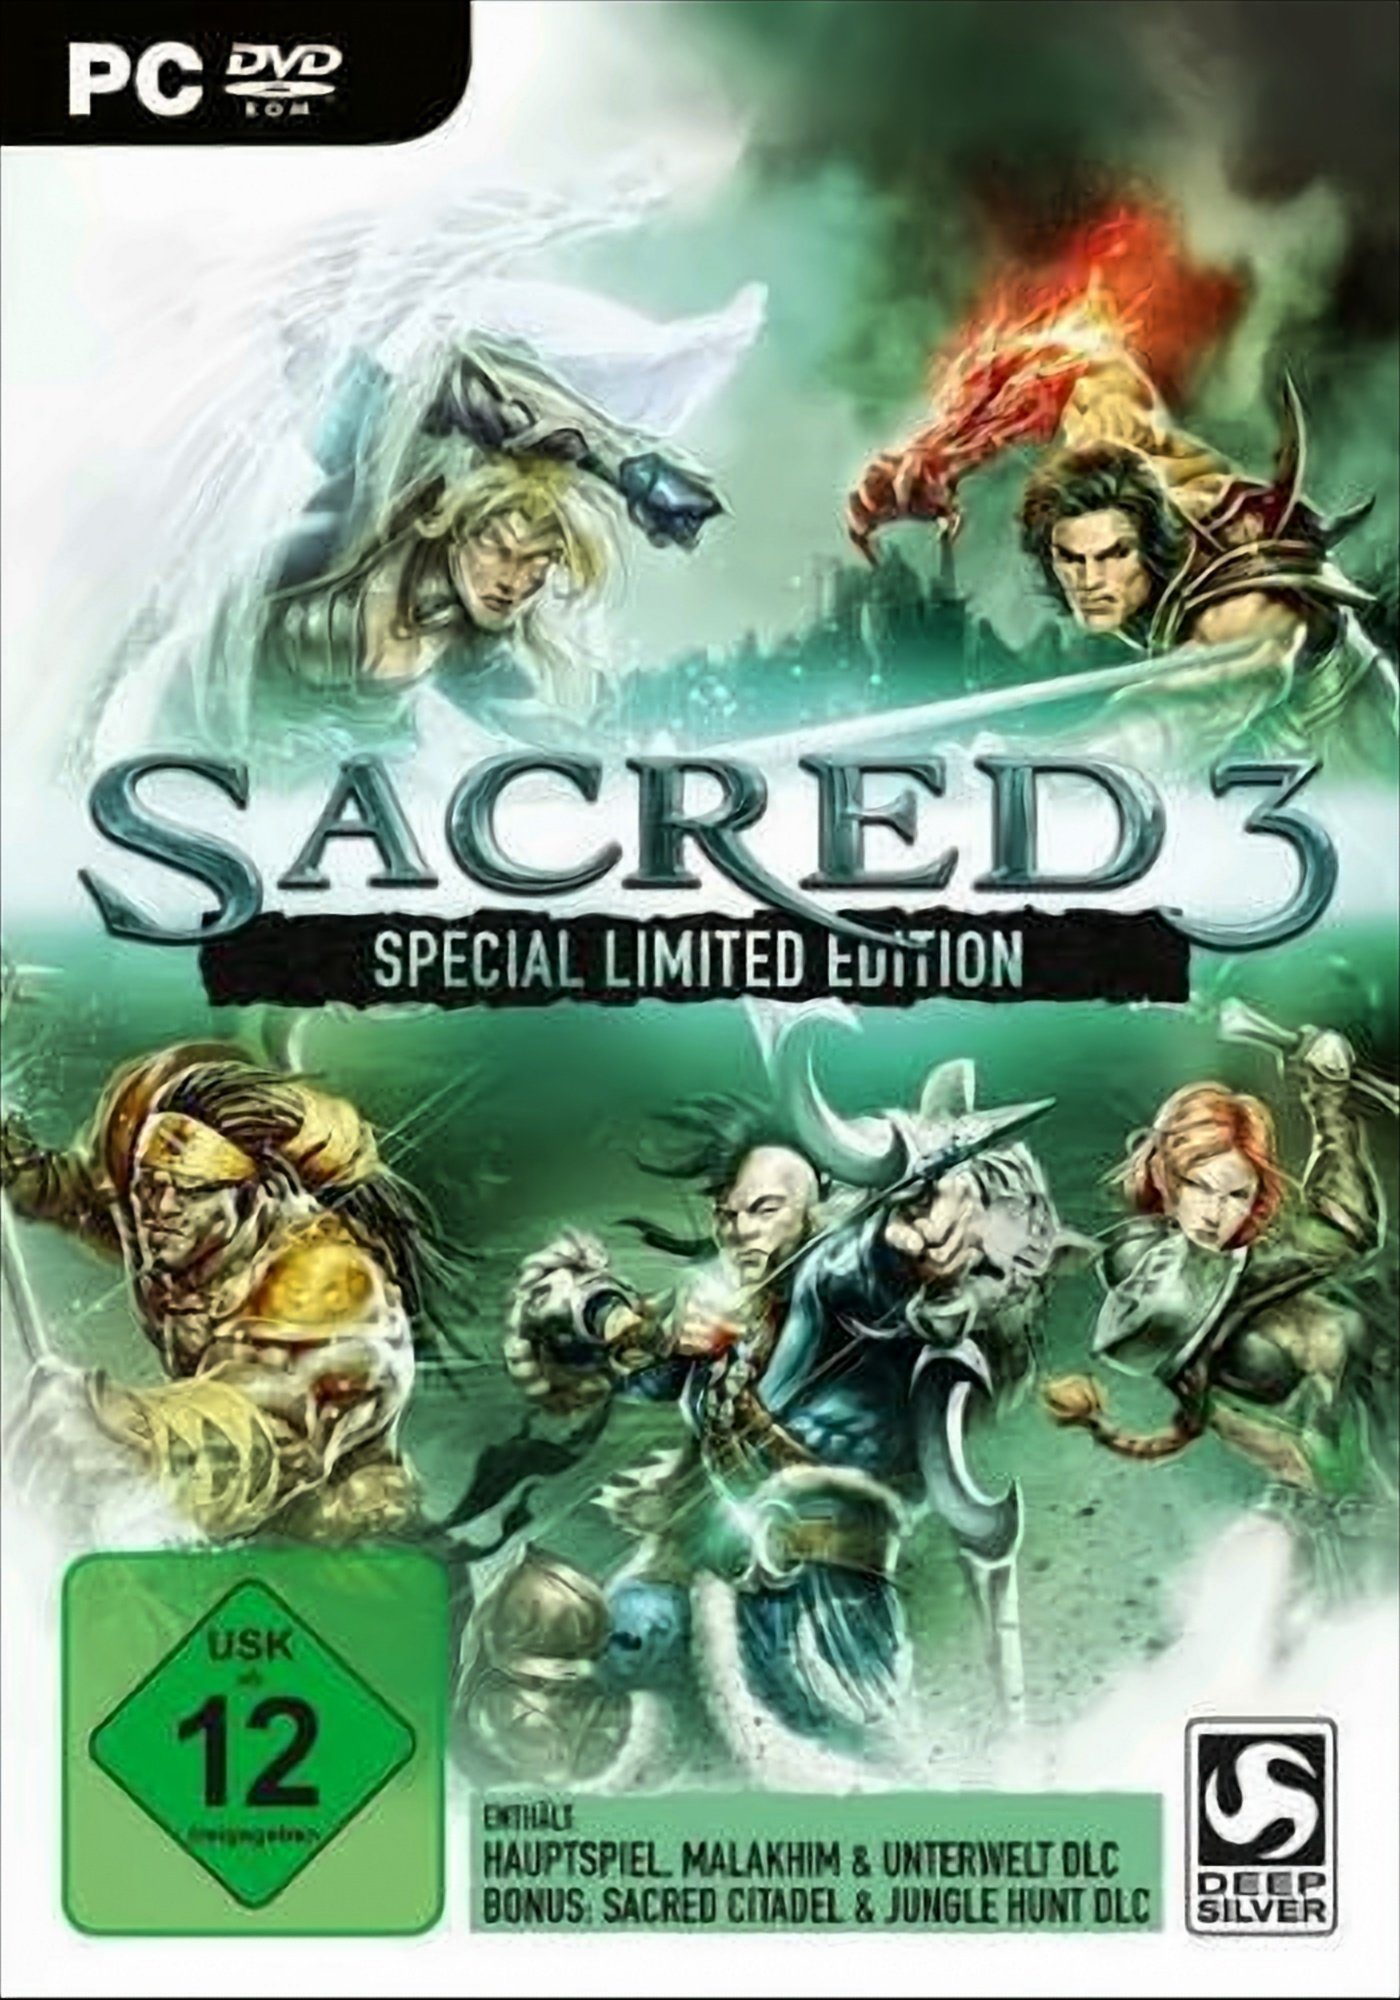 Sacred 3 - Special Limited Edition PC